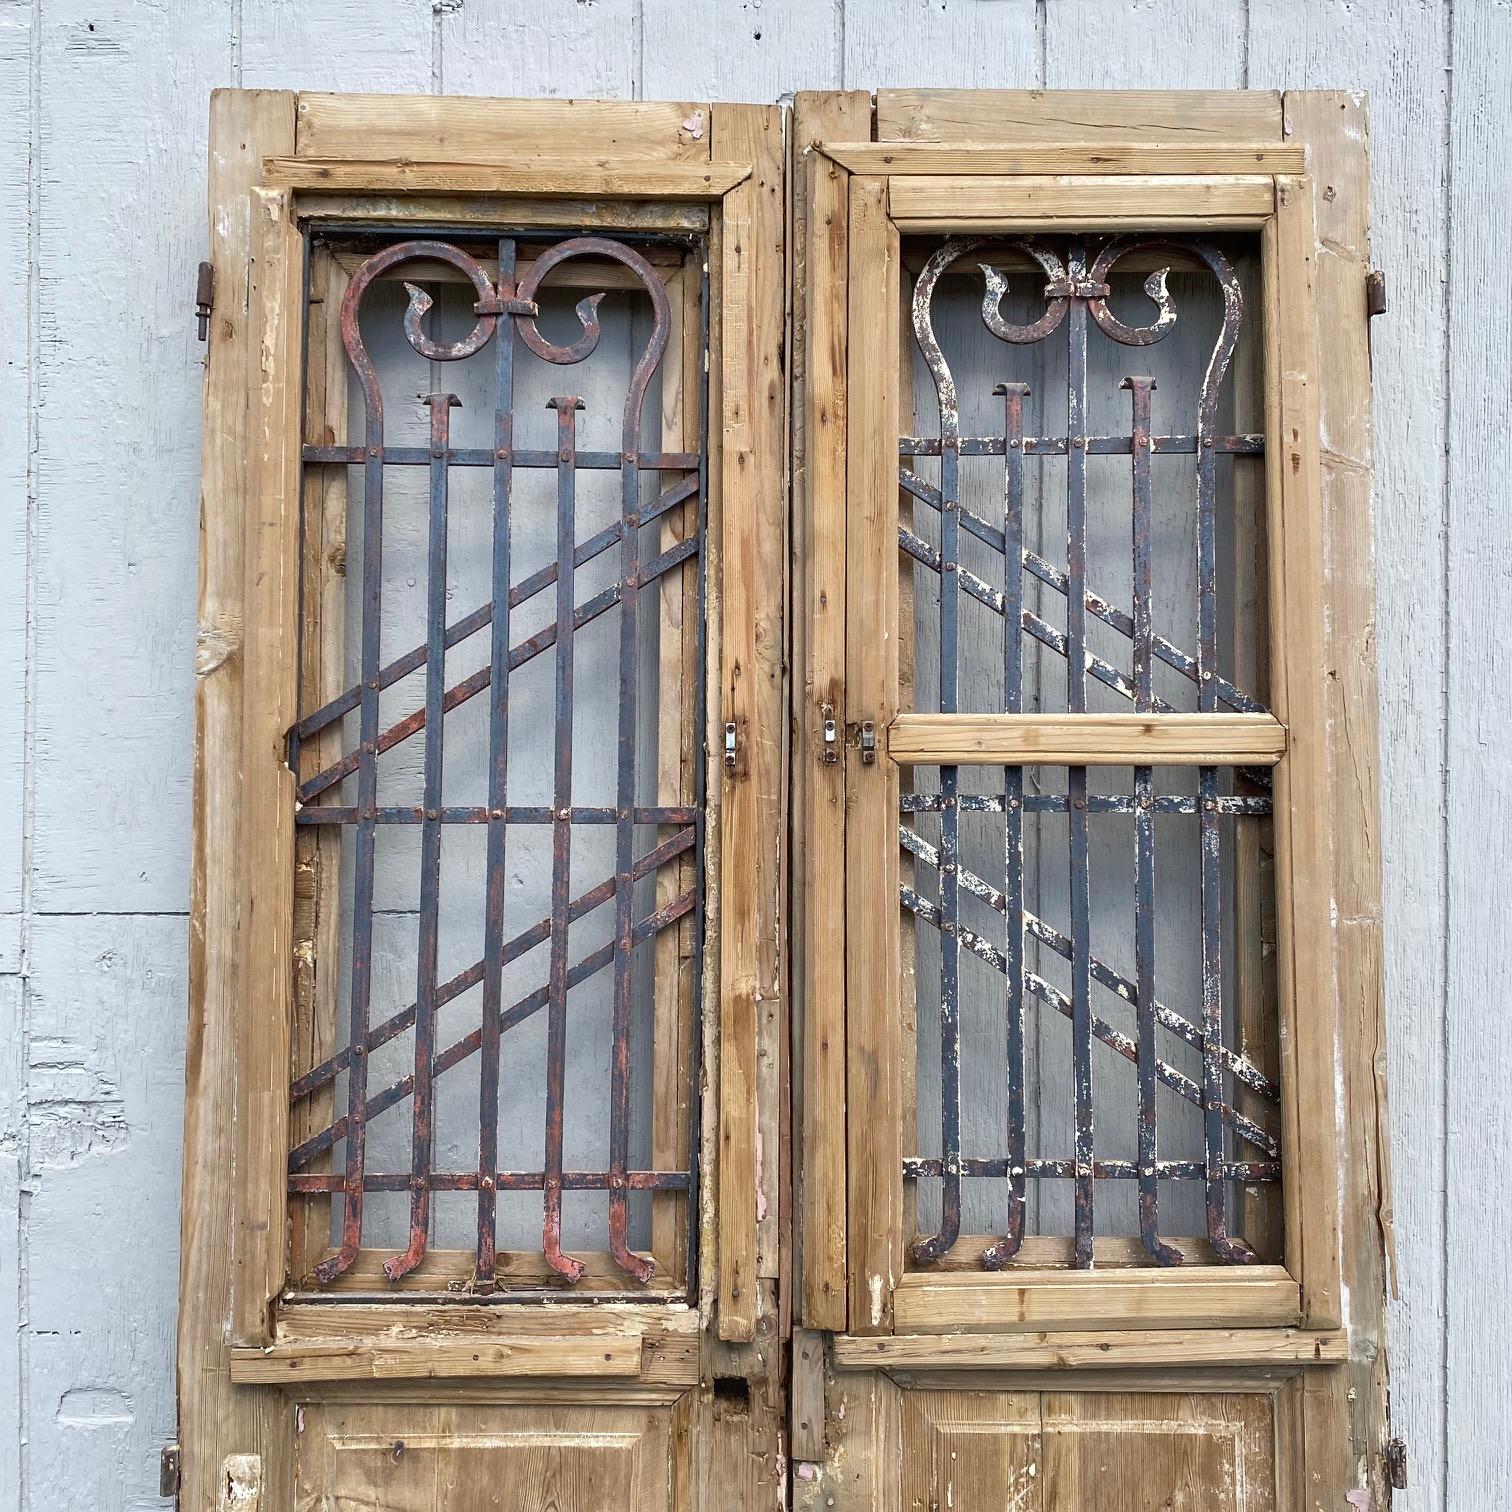 Pair of stunning stripped 19th century French doors with wrought iron, featuring bold molded detail framing the lower panels as well as the intricate wrought iron inserts above, which are artfully wrought in a beautiful geometric pattern. These